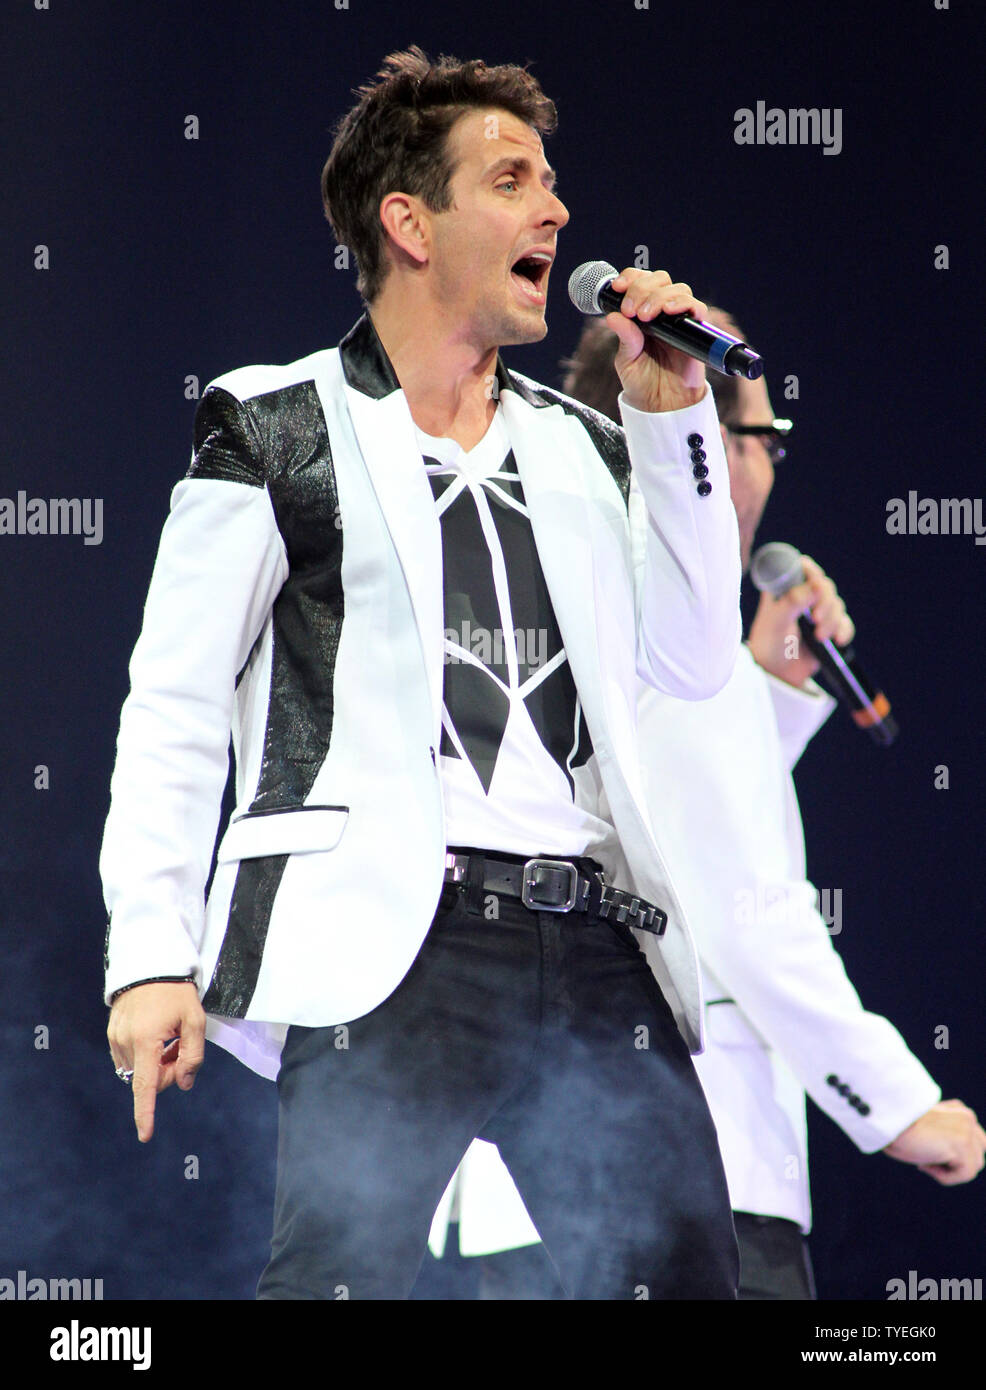 Joey McIntyre with New Kids on the Block performs in concert at the BB & T Center in Sunrise, Florida on June 22, 2013.  UPI/Michael Bush Stock Photo